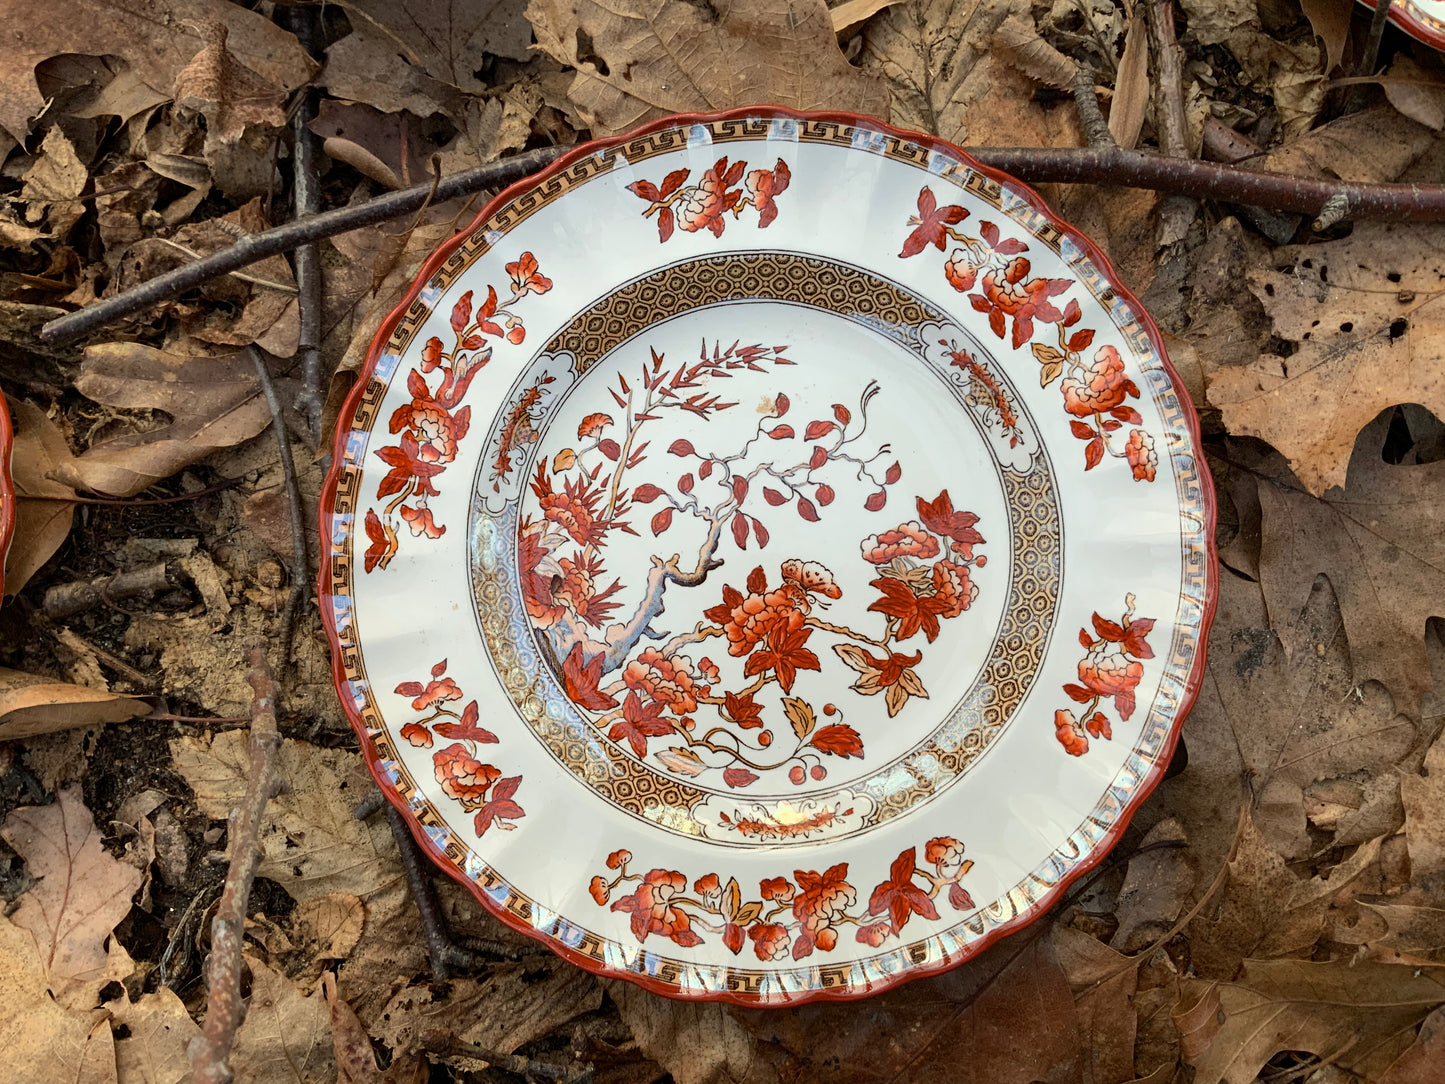 Spode Copeland India Tree Salad Plates (sold as set of 8) # IndiaTree #SpodeCopeland #SaladPlates - DharBazaar